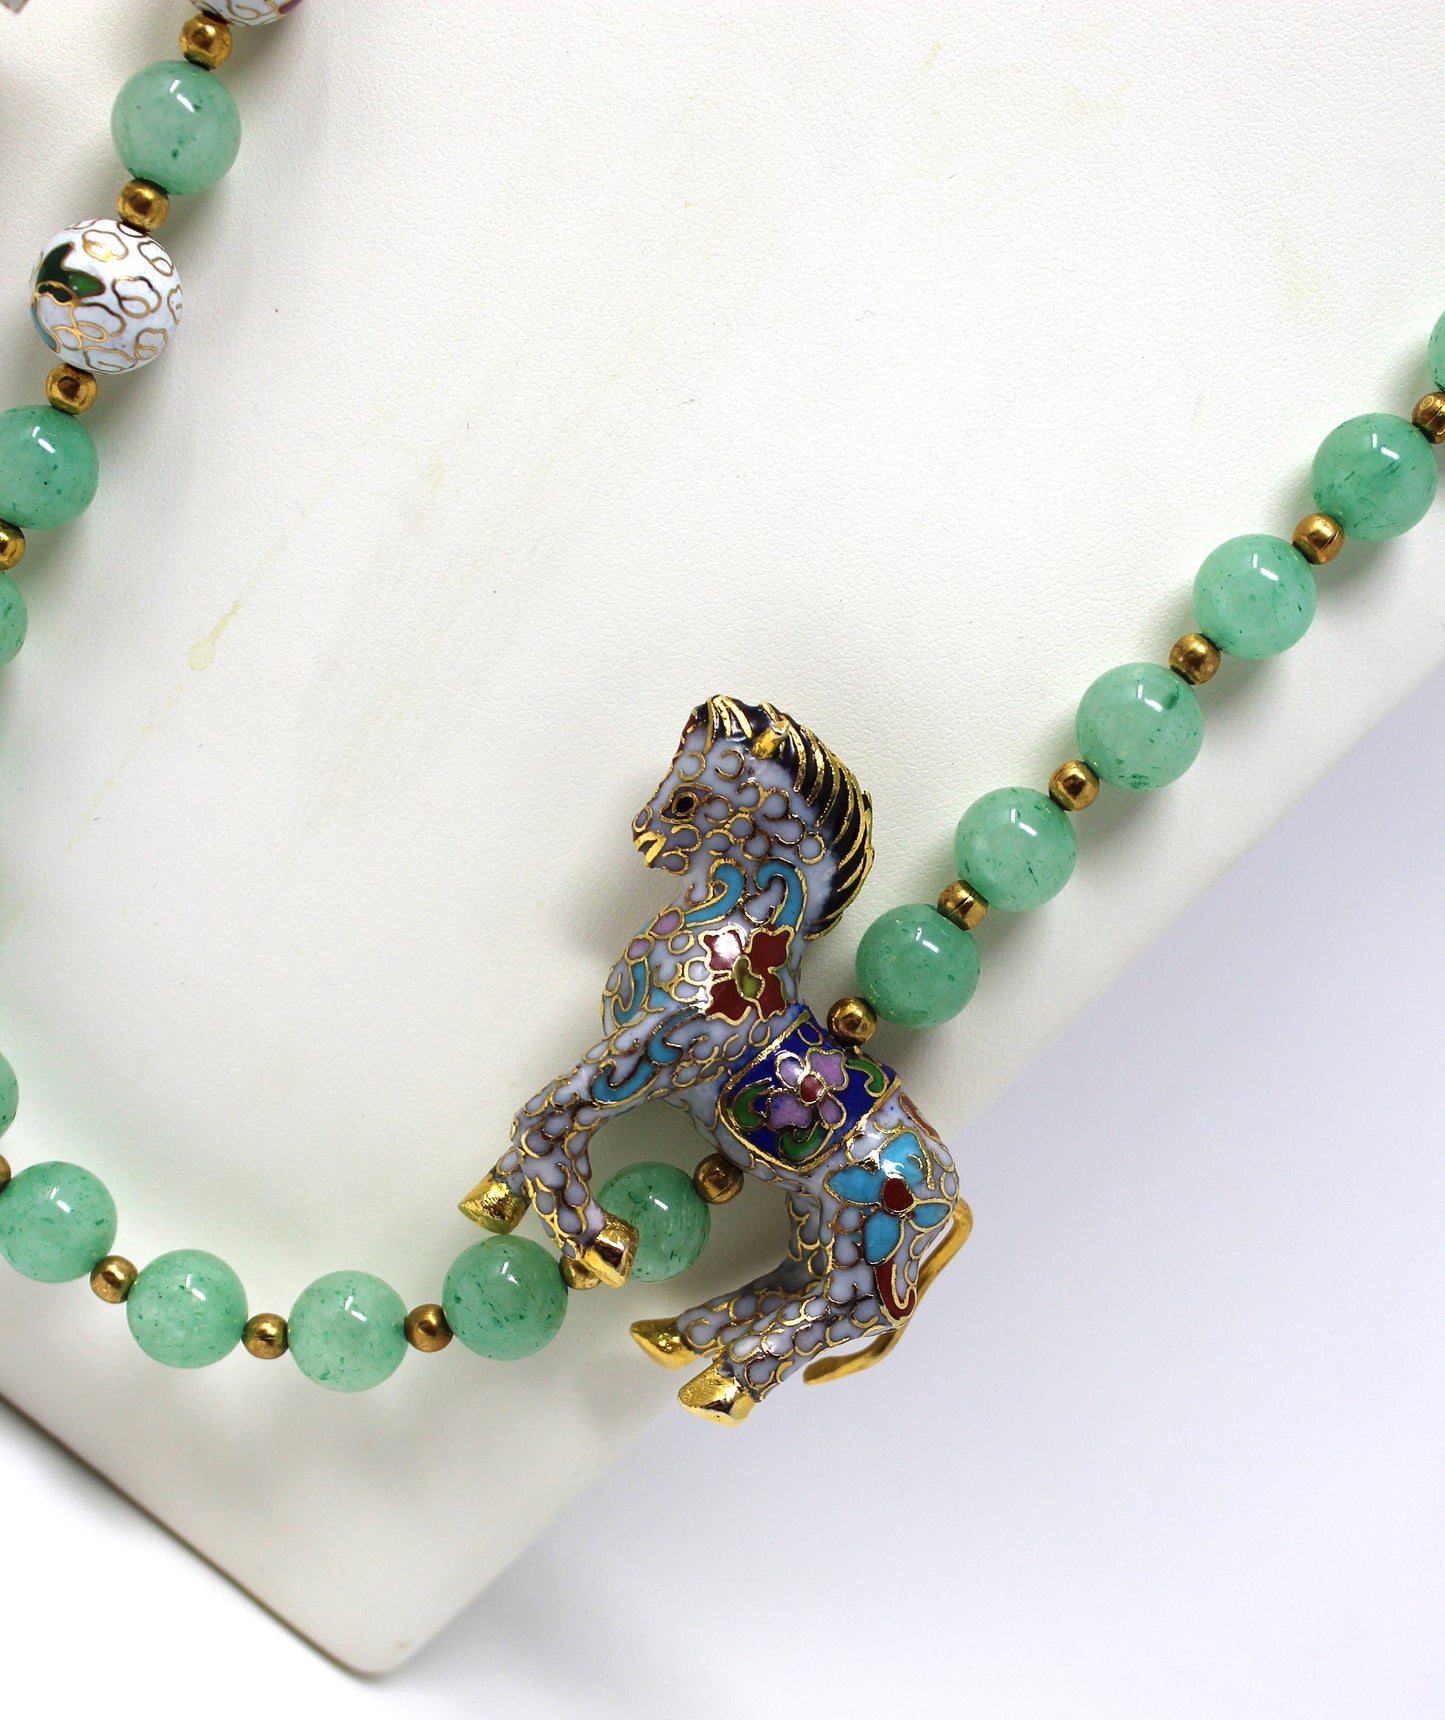 Aventurine Beaded Necklace with Cloisonne Horse and Matching French Hook Earrings